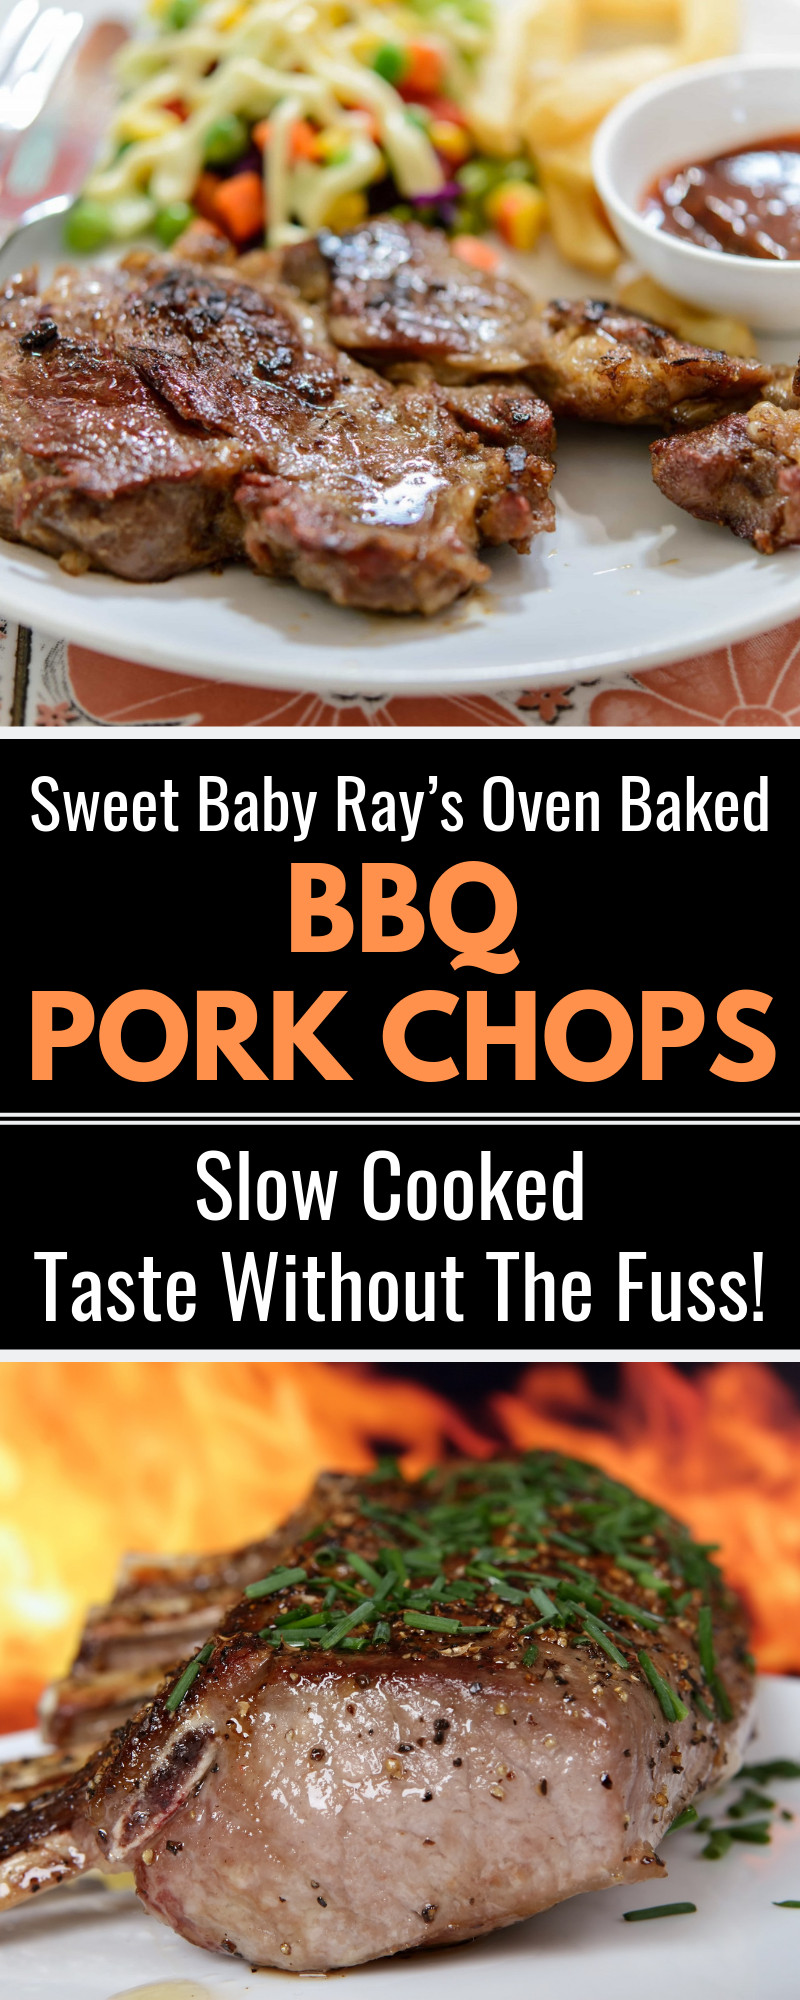 Sweet Baby Ray'S Bbq Pork Chops In Oven
 Sweet Baby Ray s Oven Baked BBQ Pork Chops Slow Cooked